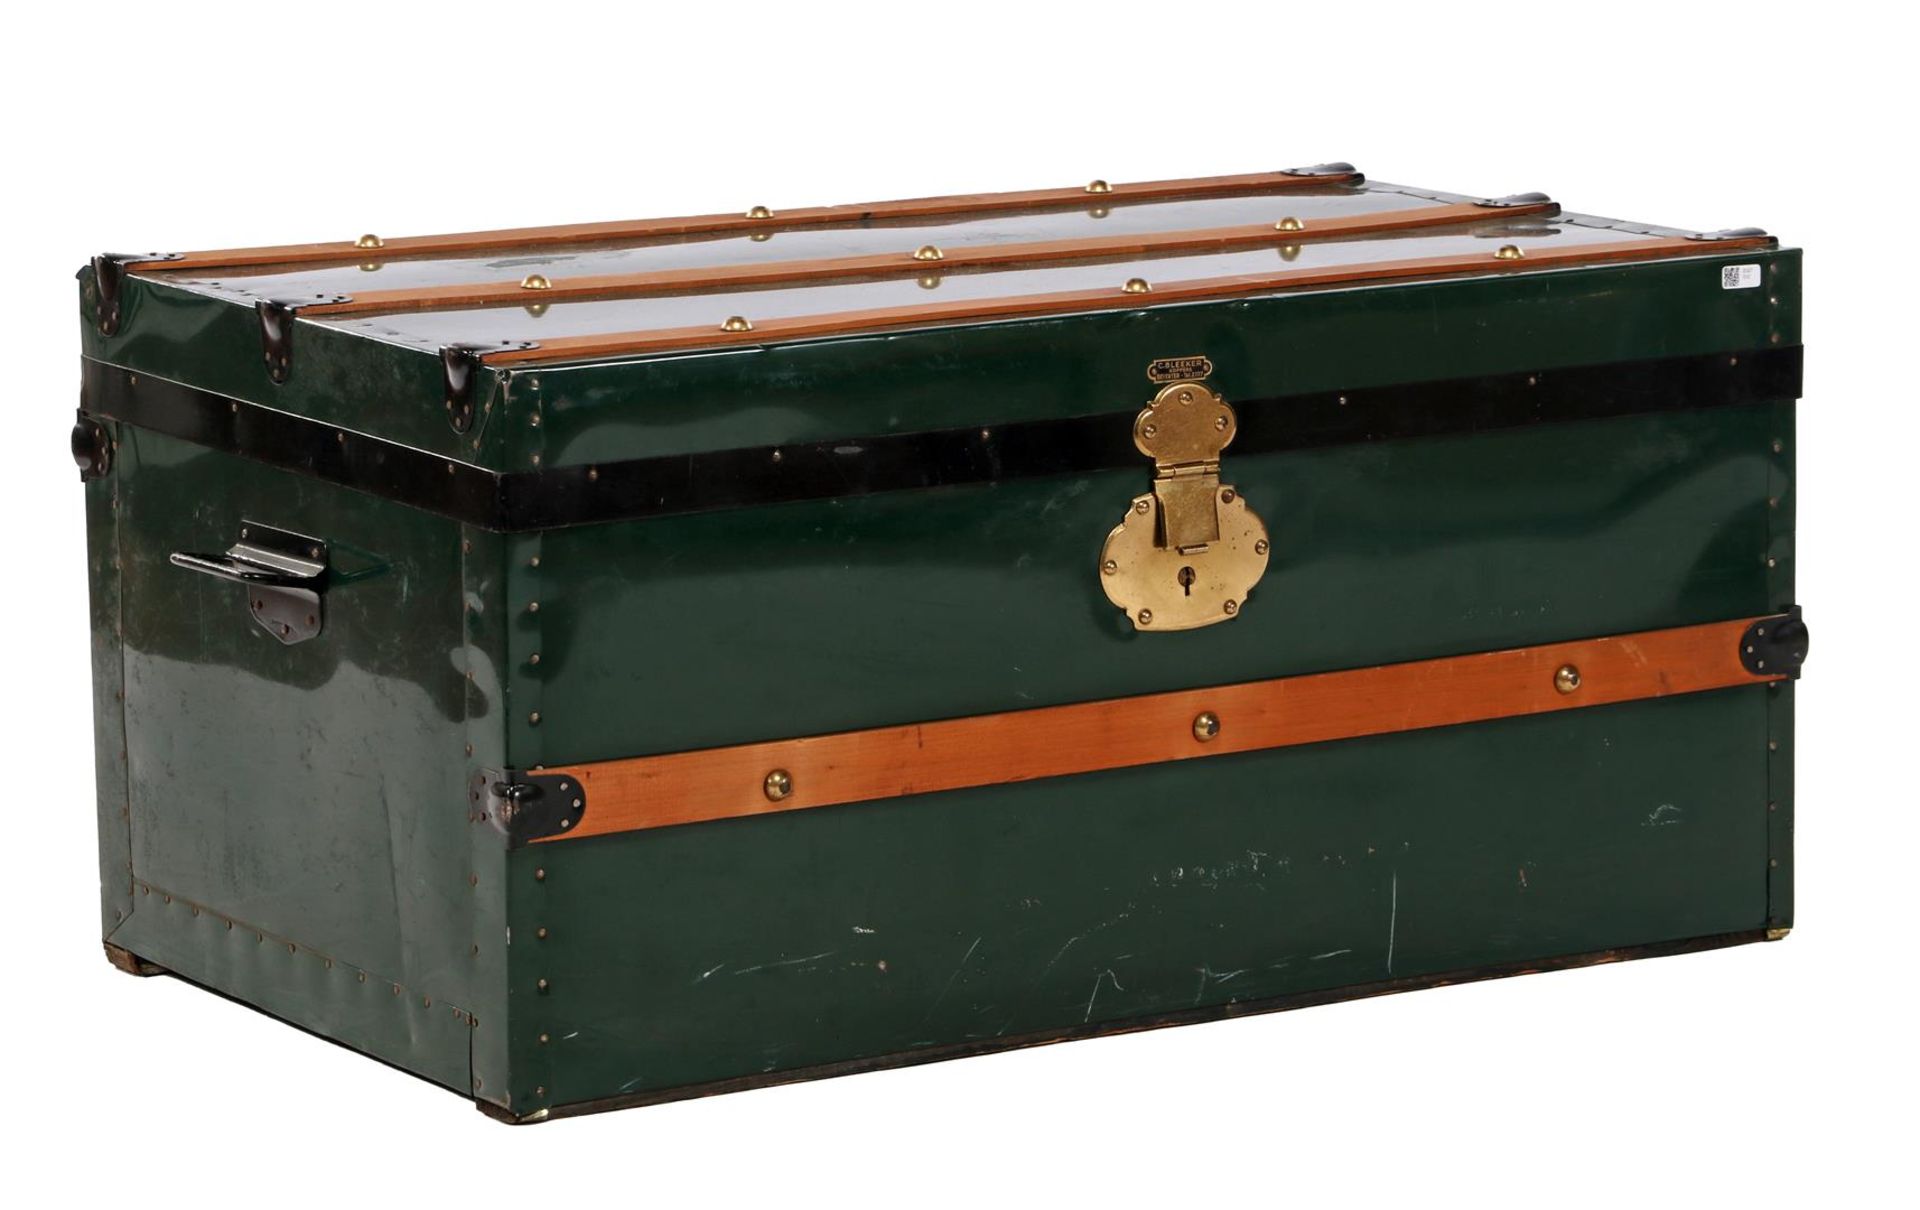 Green metal trunk with wooden straps, with address C. Bleeker suitcases Deventer 39 cm high, 81 cm